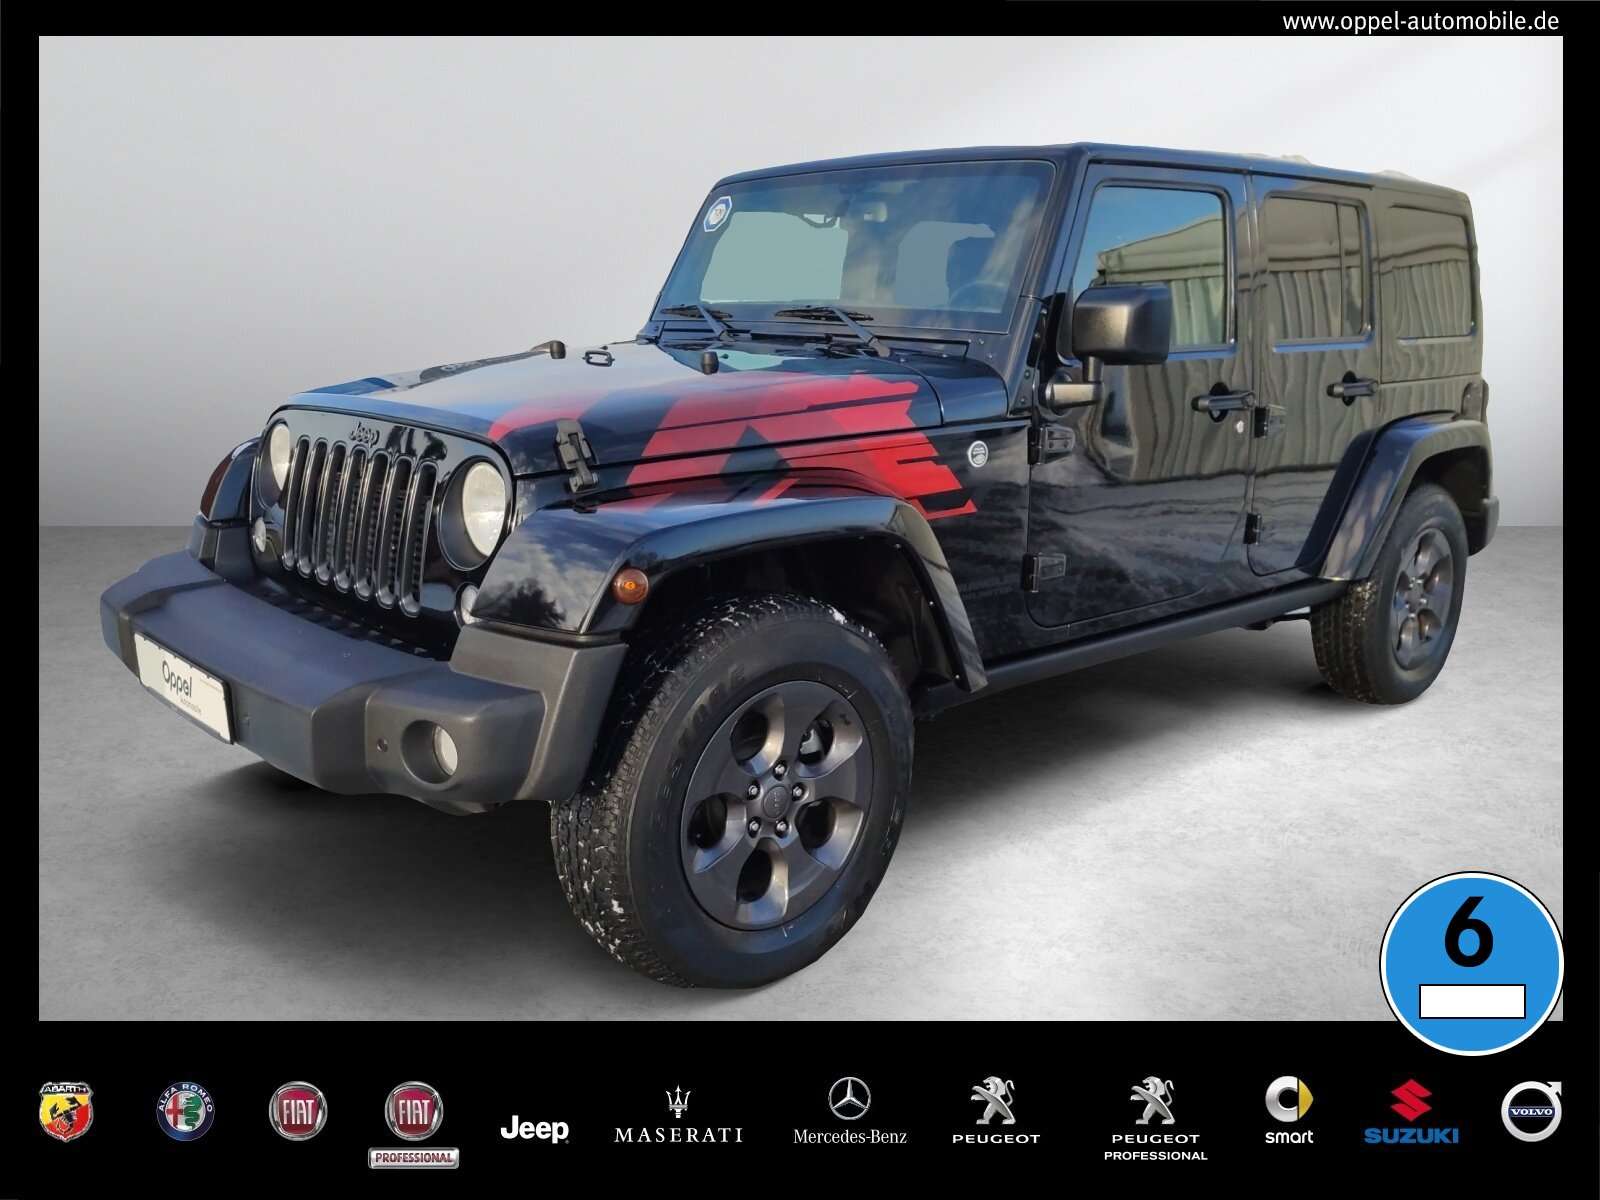 Jeep Wrangler Off-Road/Pick-up in Black used in Plauen for € 36,